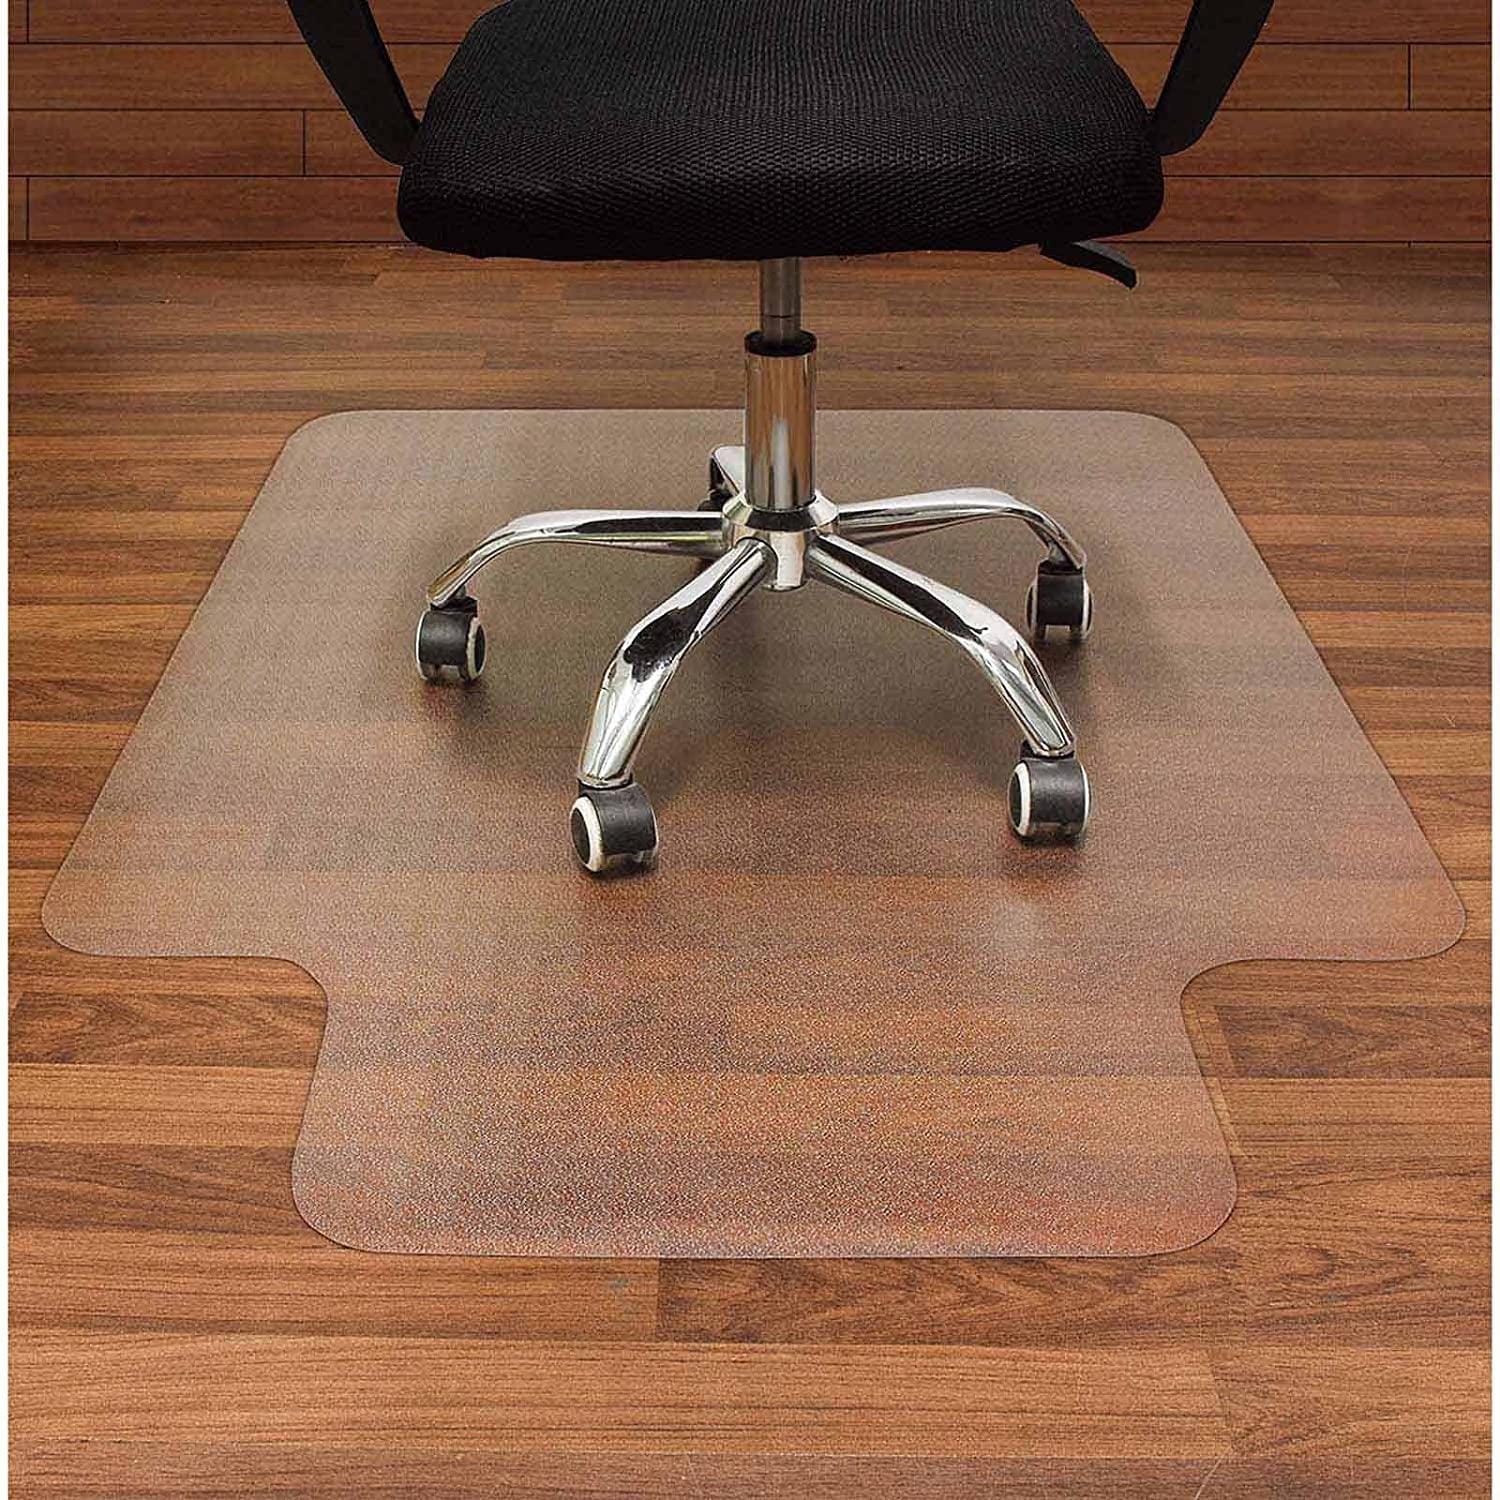 Home Carpet Chair Mat Computer Floor Office Working 48*36 PVC Protective Pad USA 